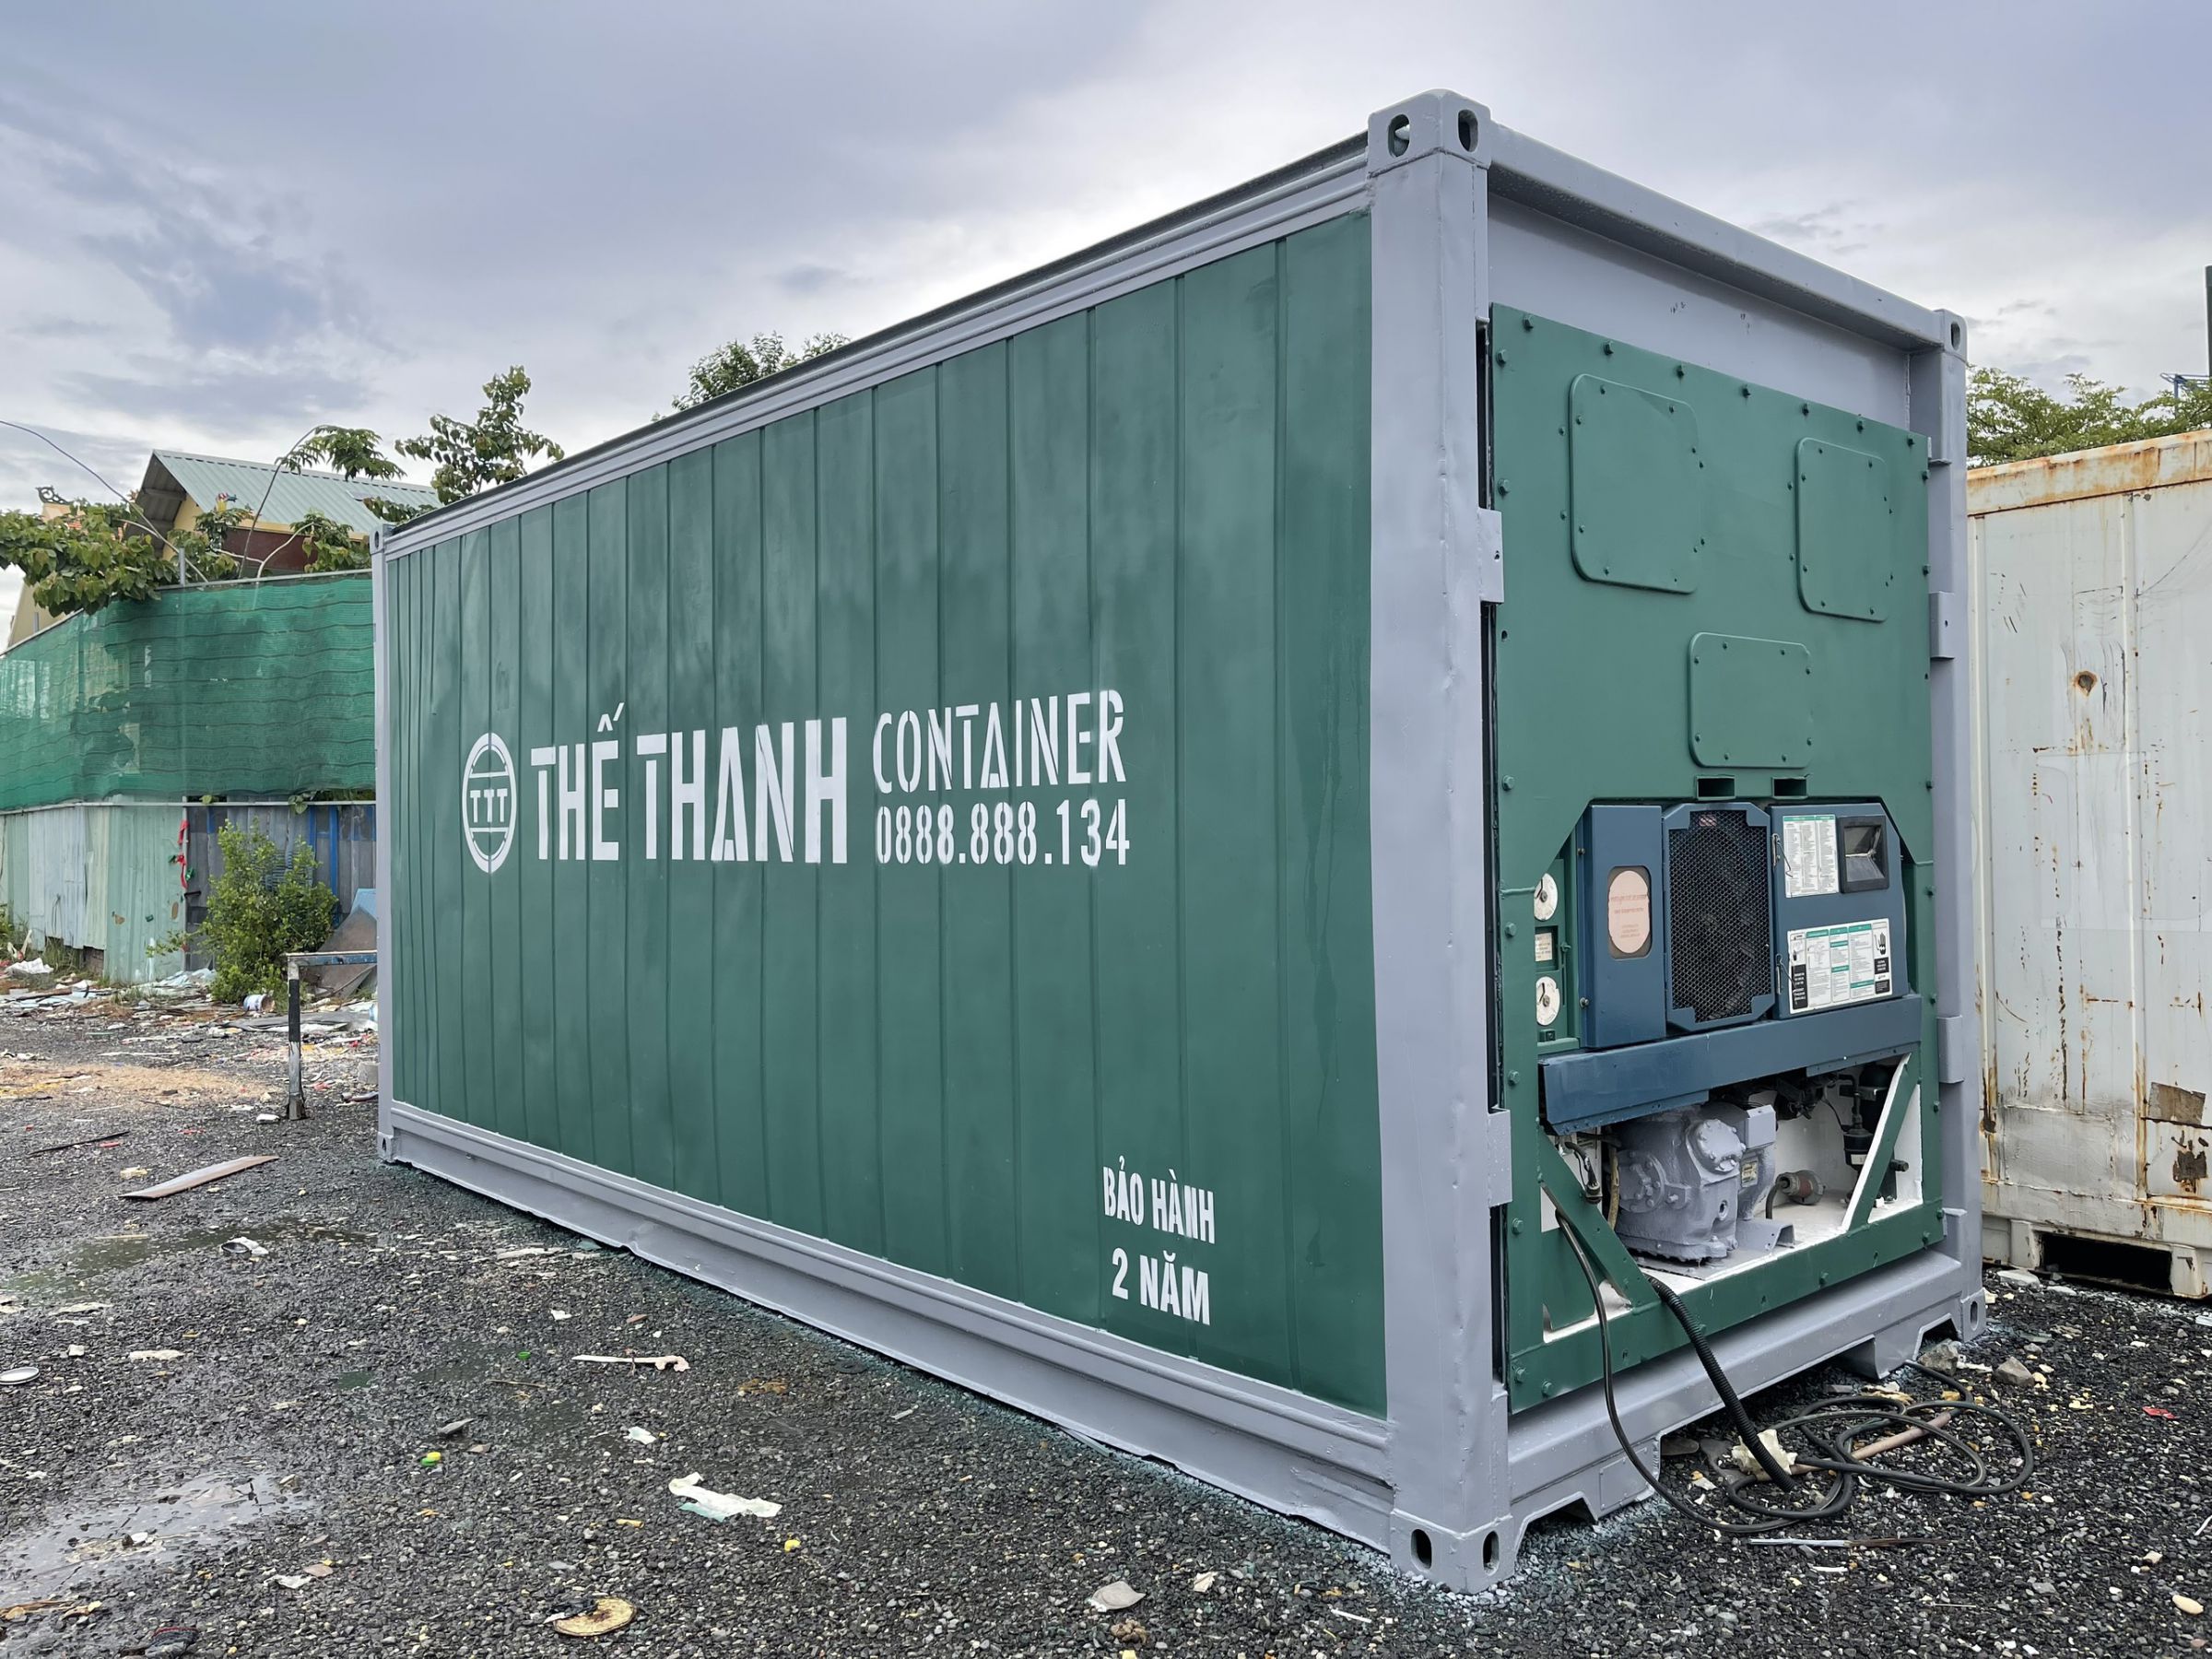 CONTAINER LẠNH 20 FEET CAO